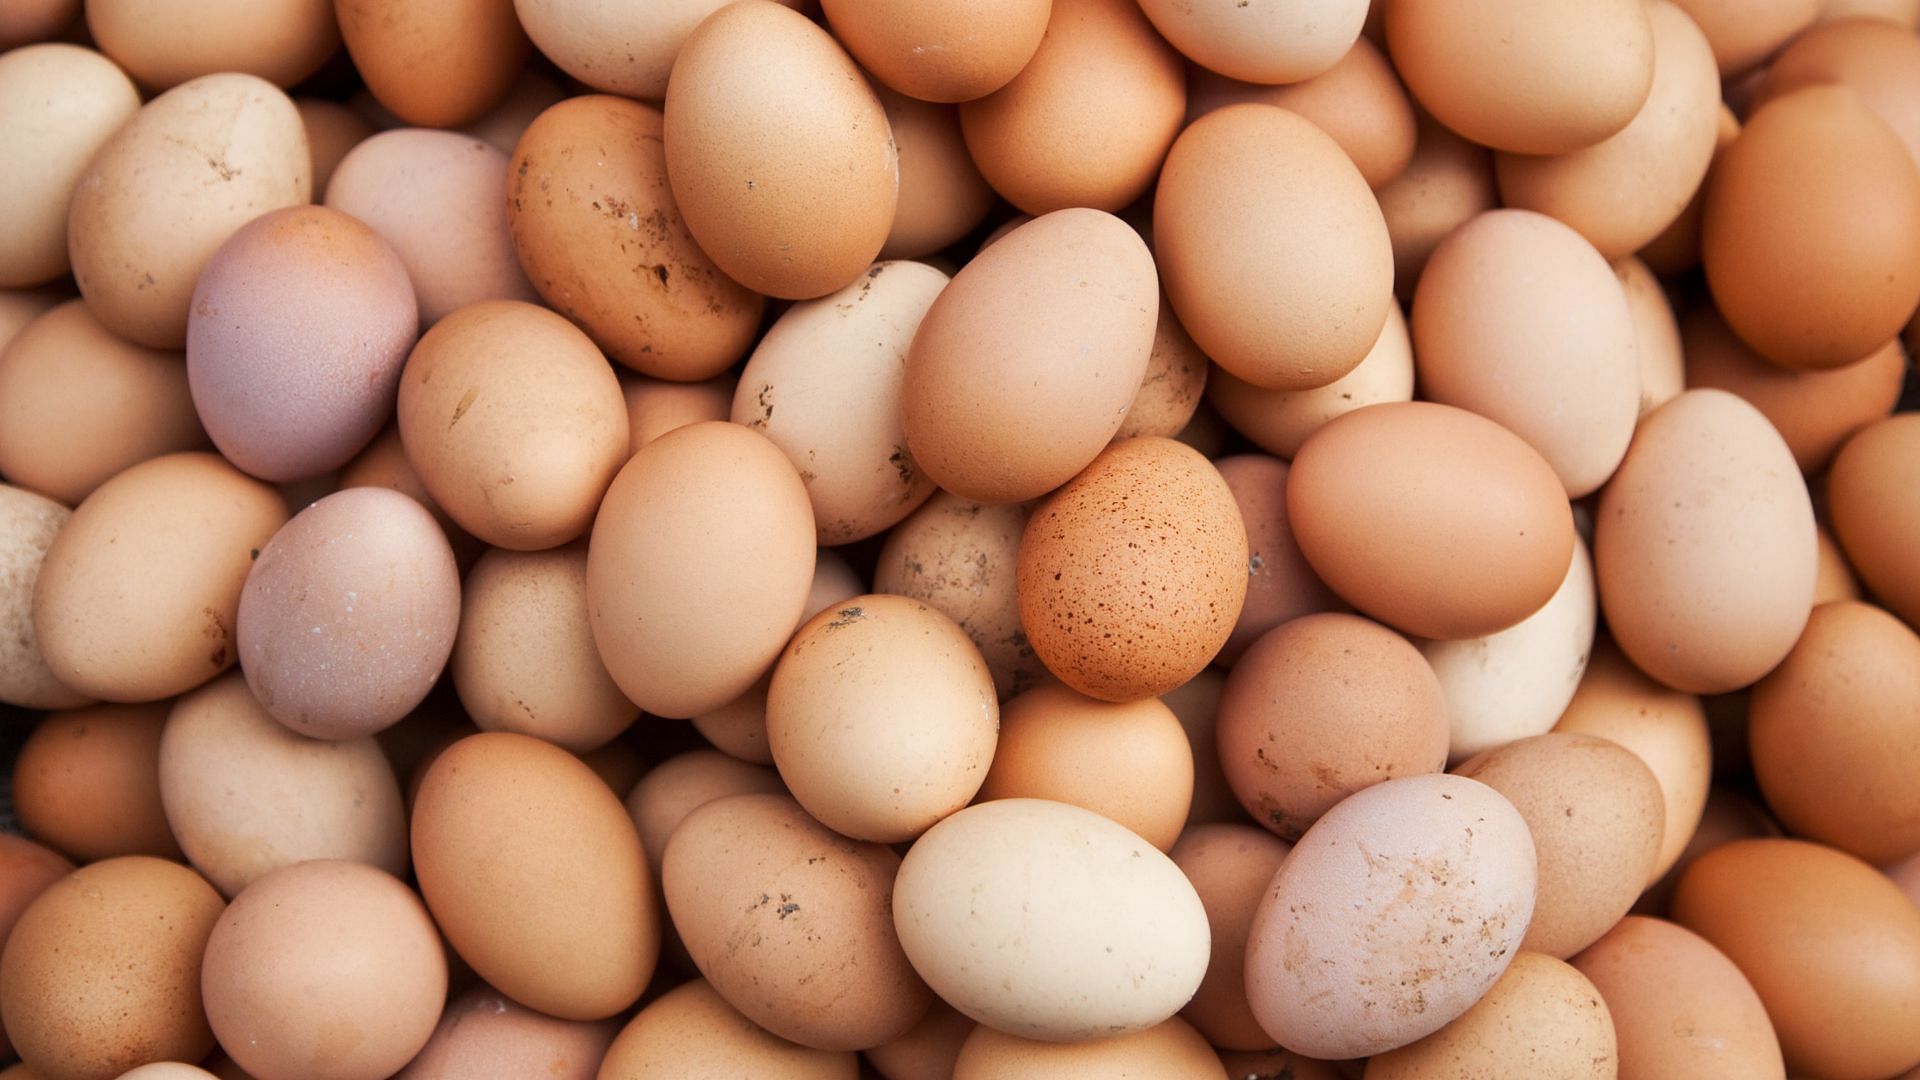 Ever-high egg prices concern US farm groups as they call for an investigation regarding the same (Image via Nikada/Getty Images)